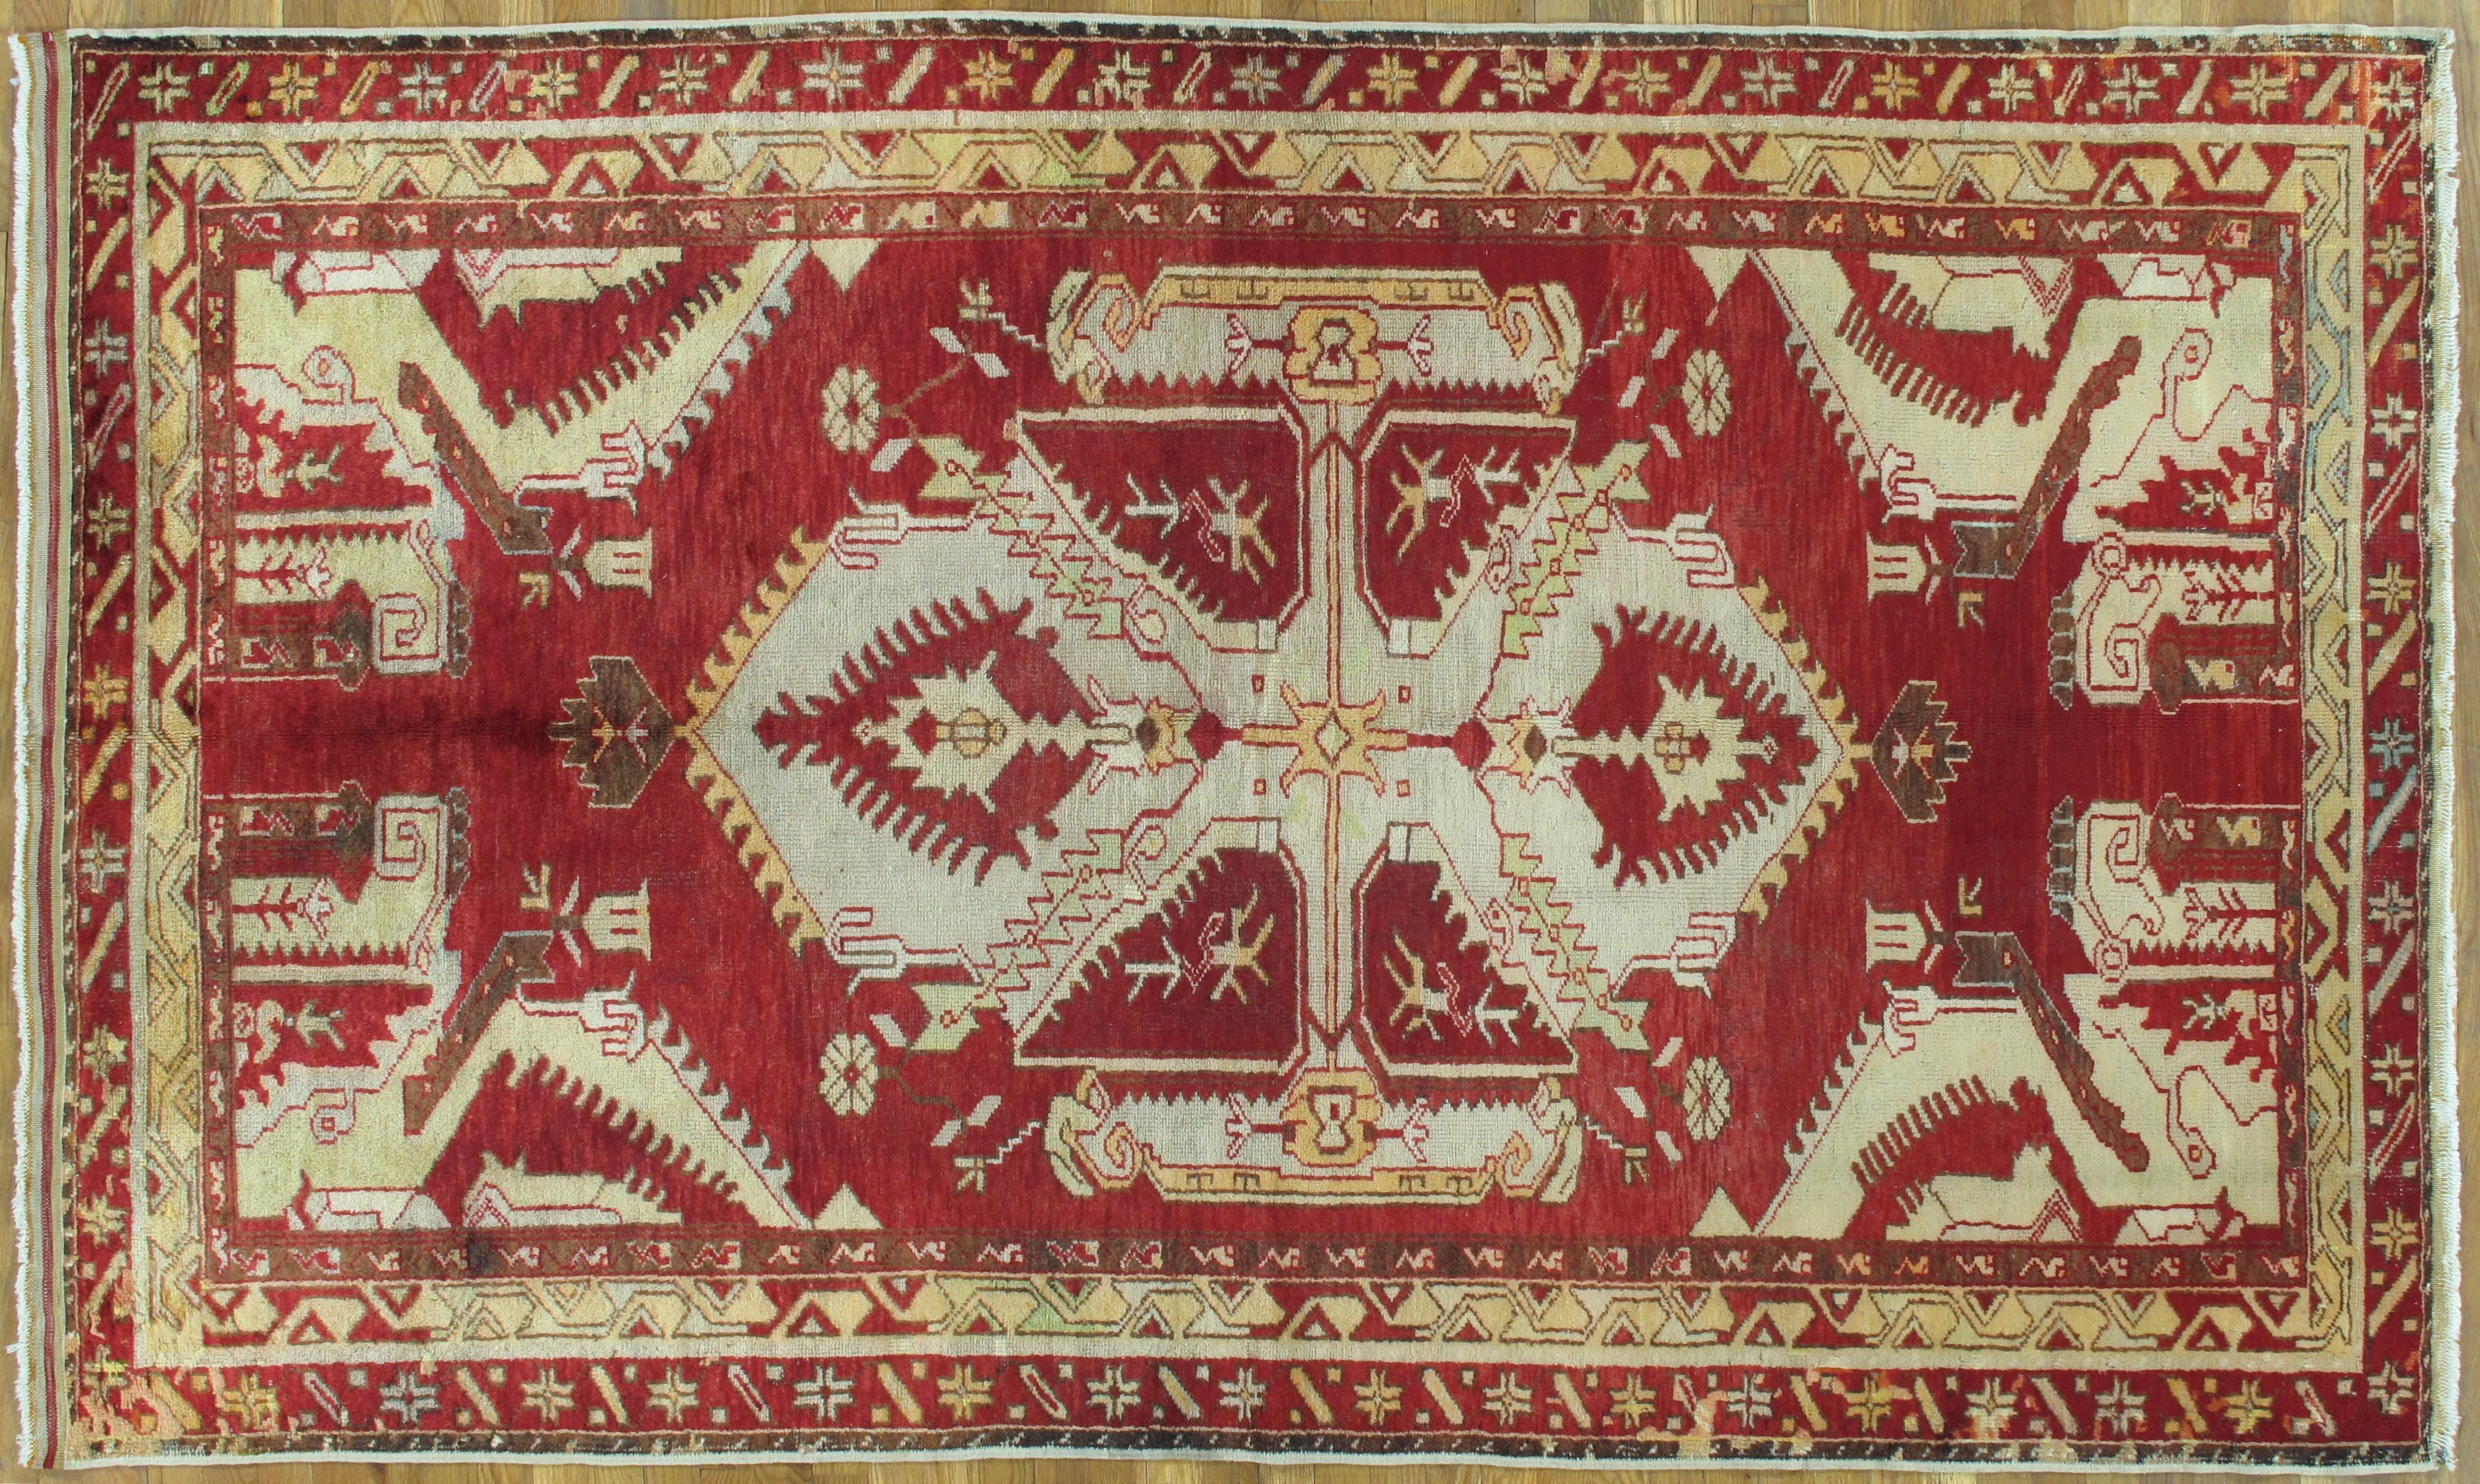 Antique Turkish Oushak carpets made in the late 19th century are renowned for their exquisite craftsmanship, intricate designs, and stunning color palettes. These carpets were handwoven in the Oushak region of Turkey, which has a rich tradition of